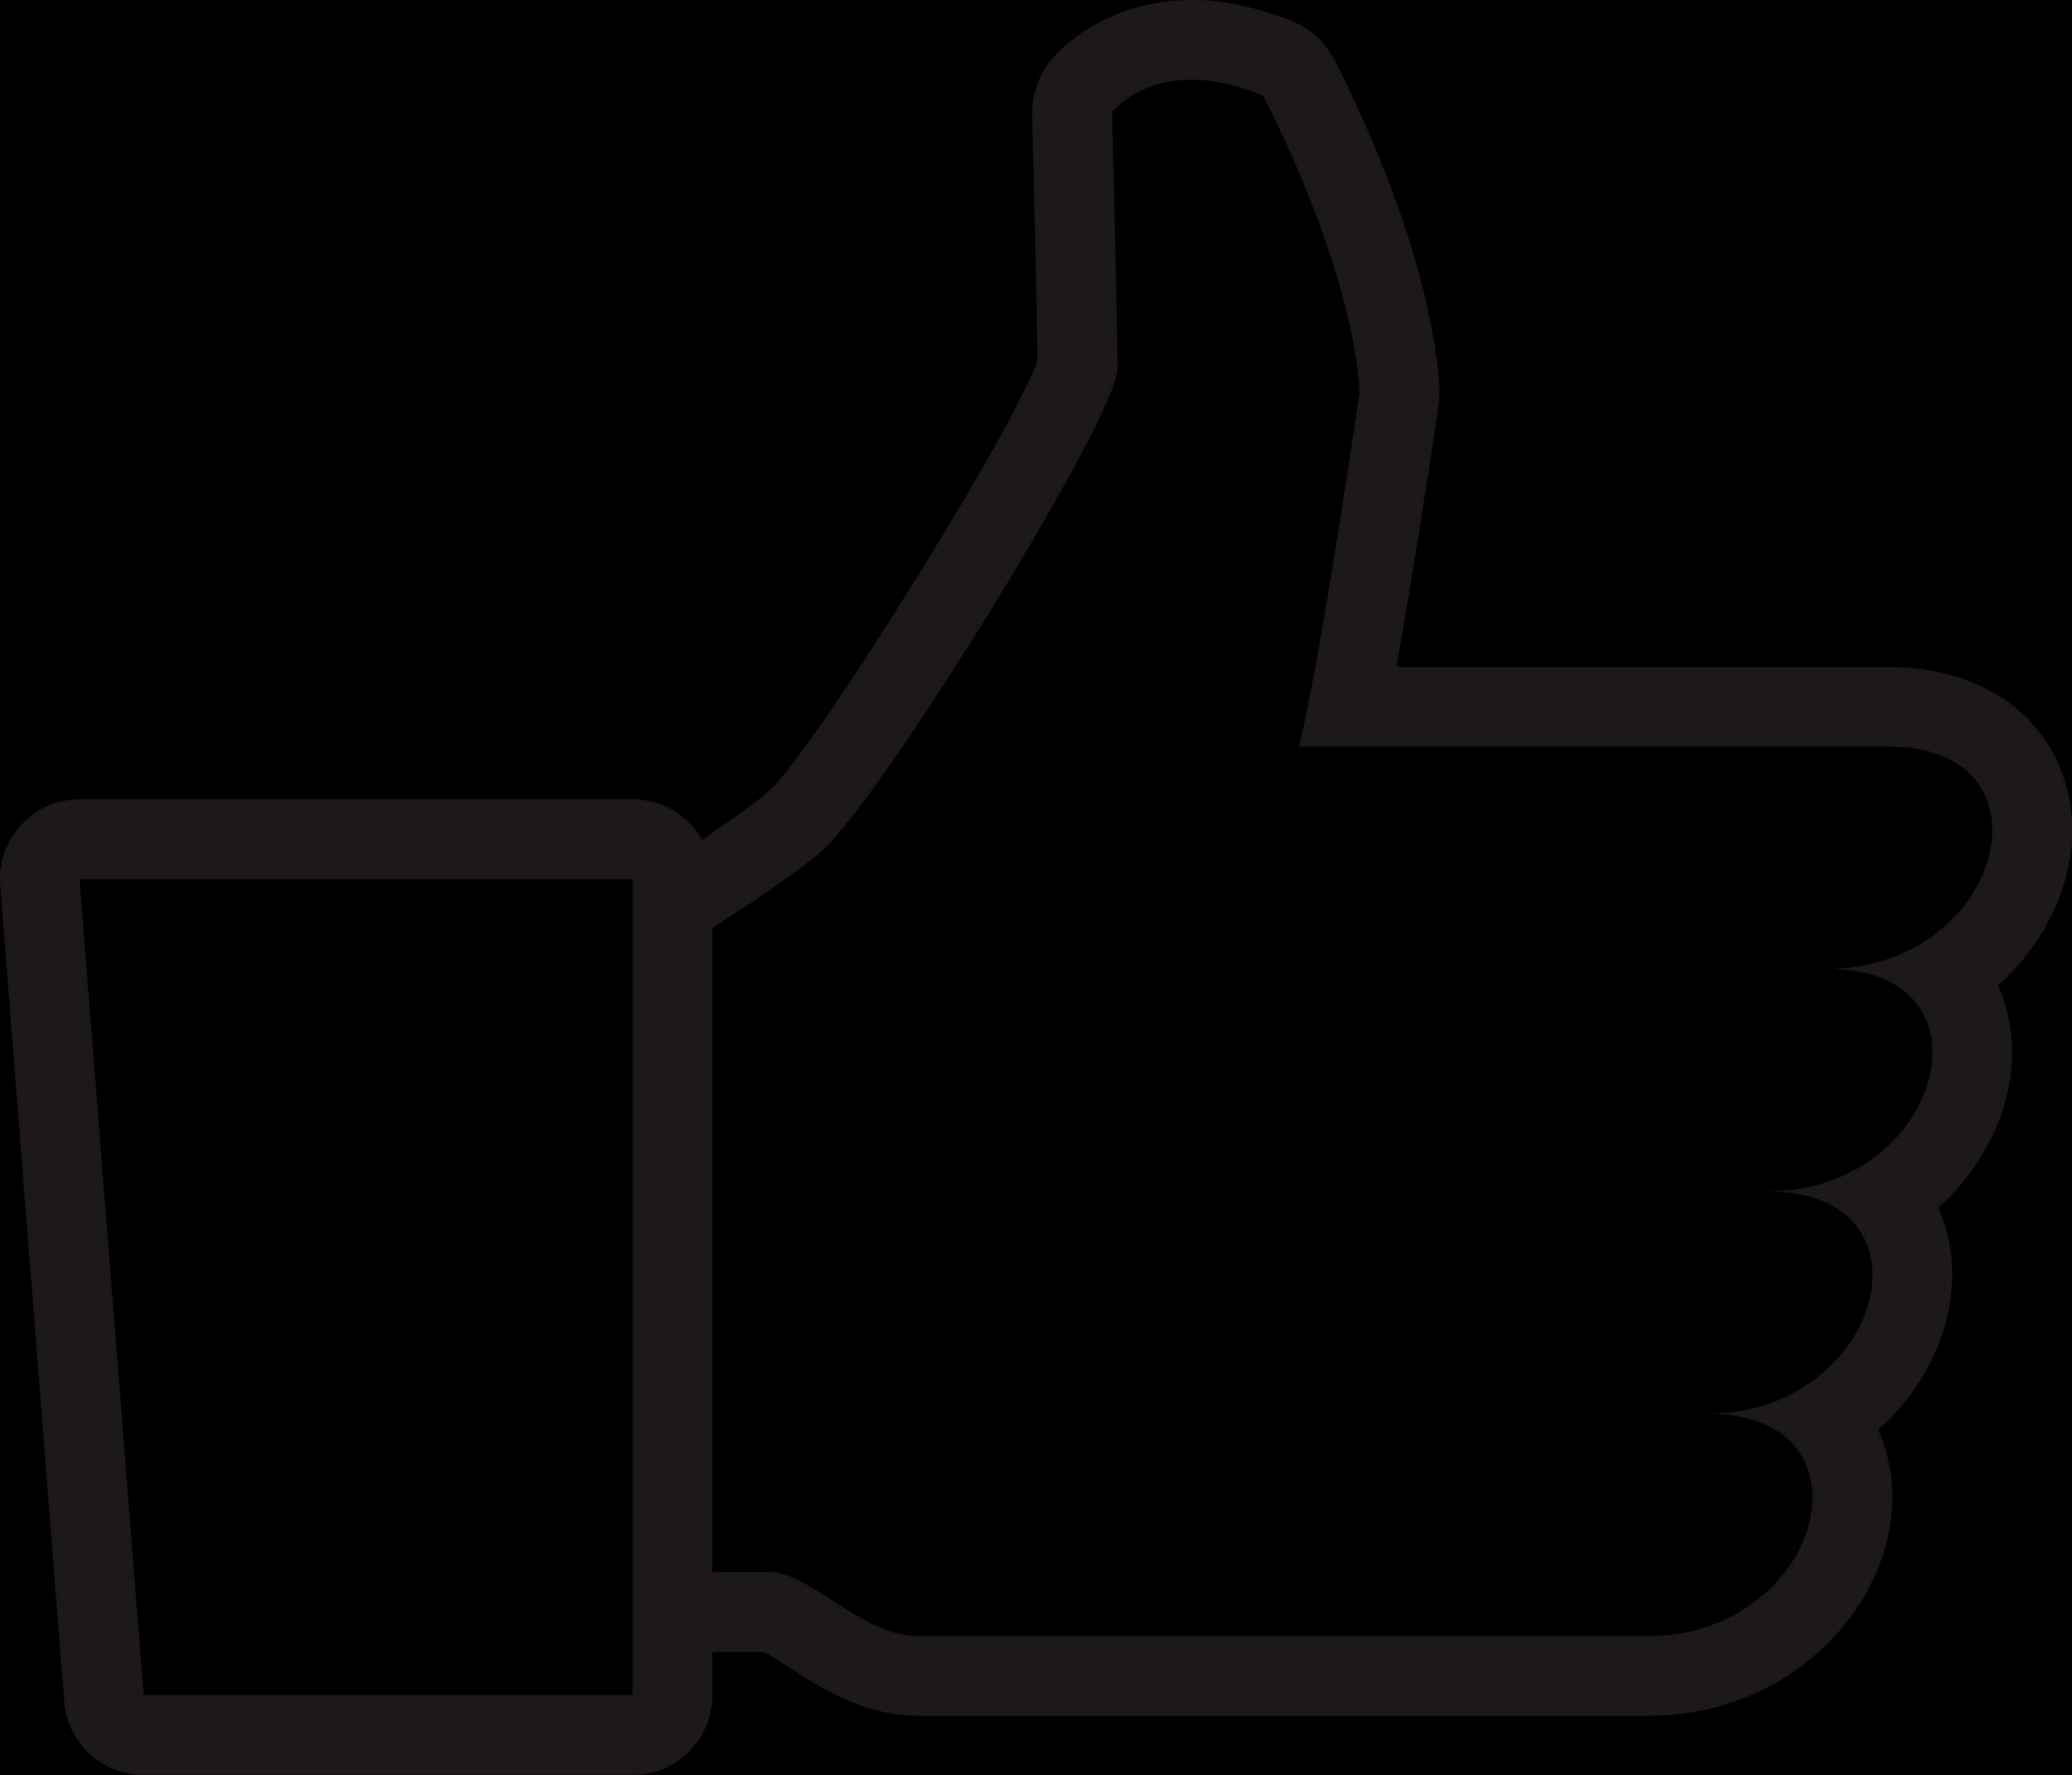 Thumbs Up Silhouette Icon